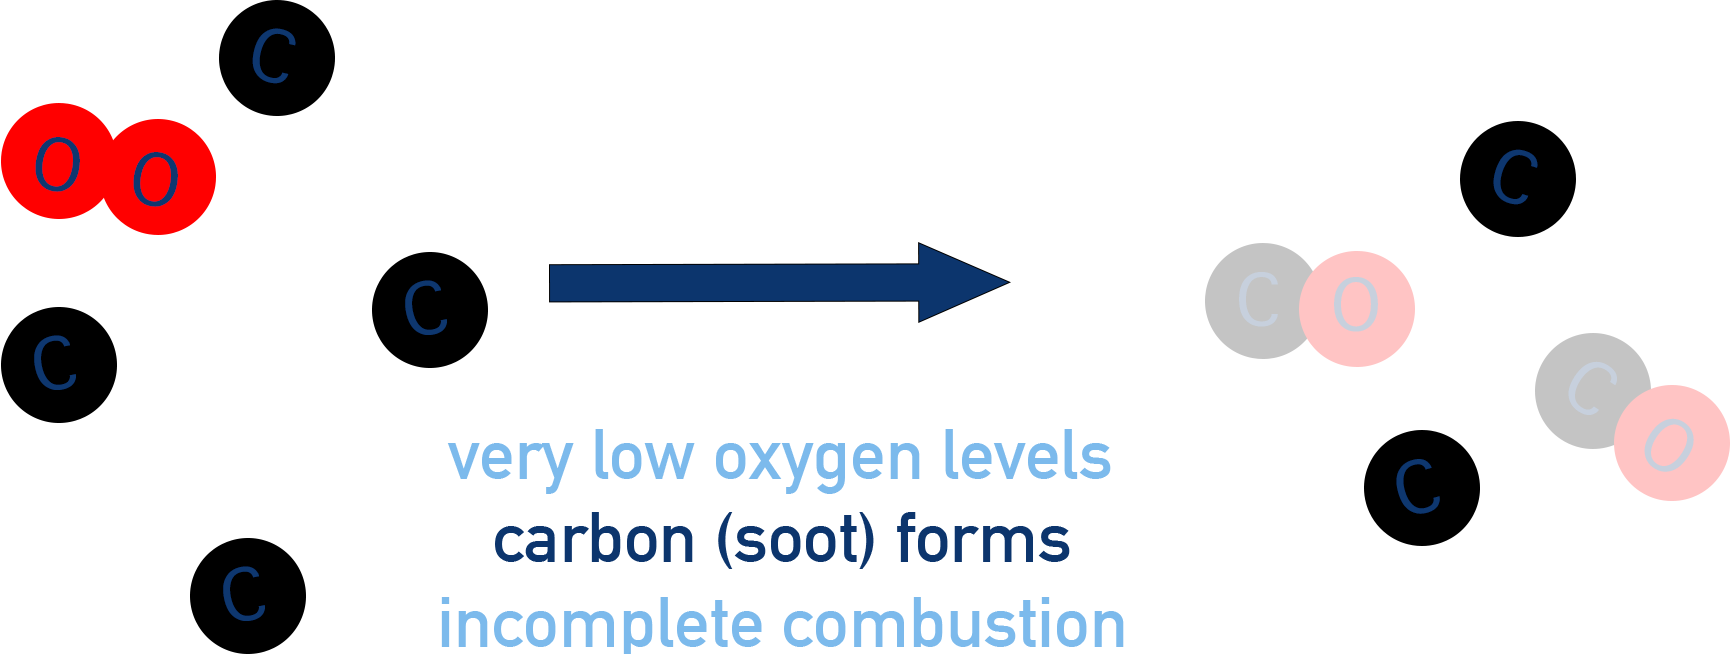 Carbon soot incomplete combustion low oxygen levels a-level chemistry